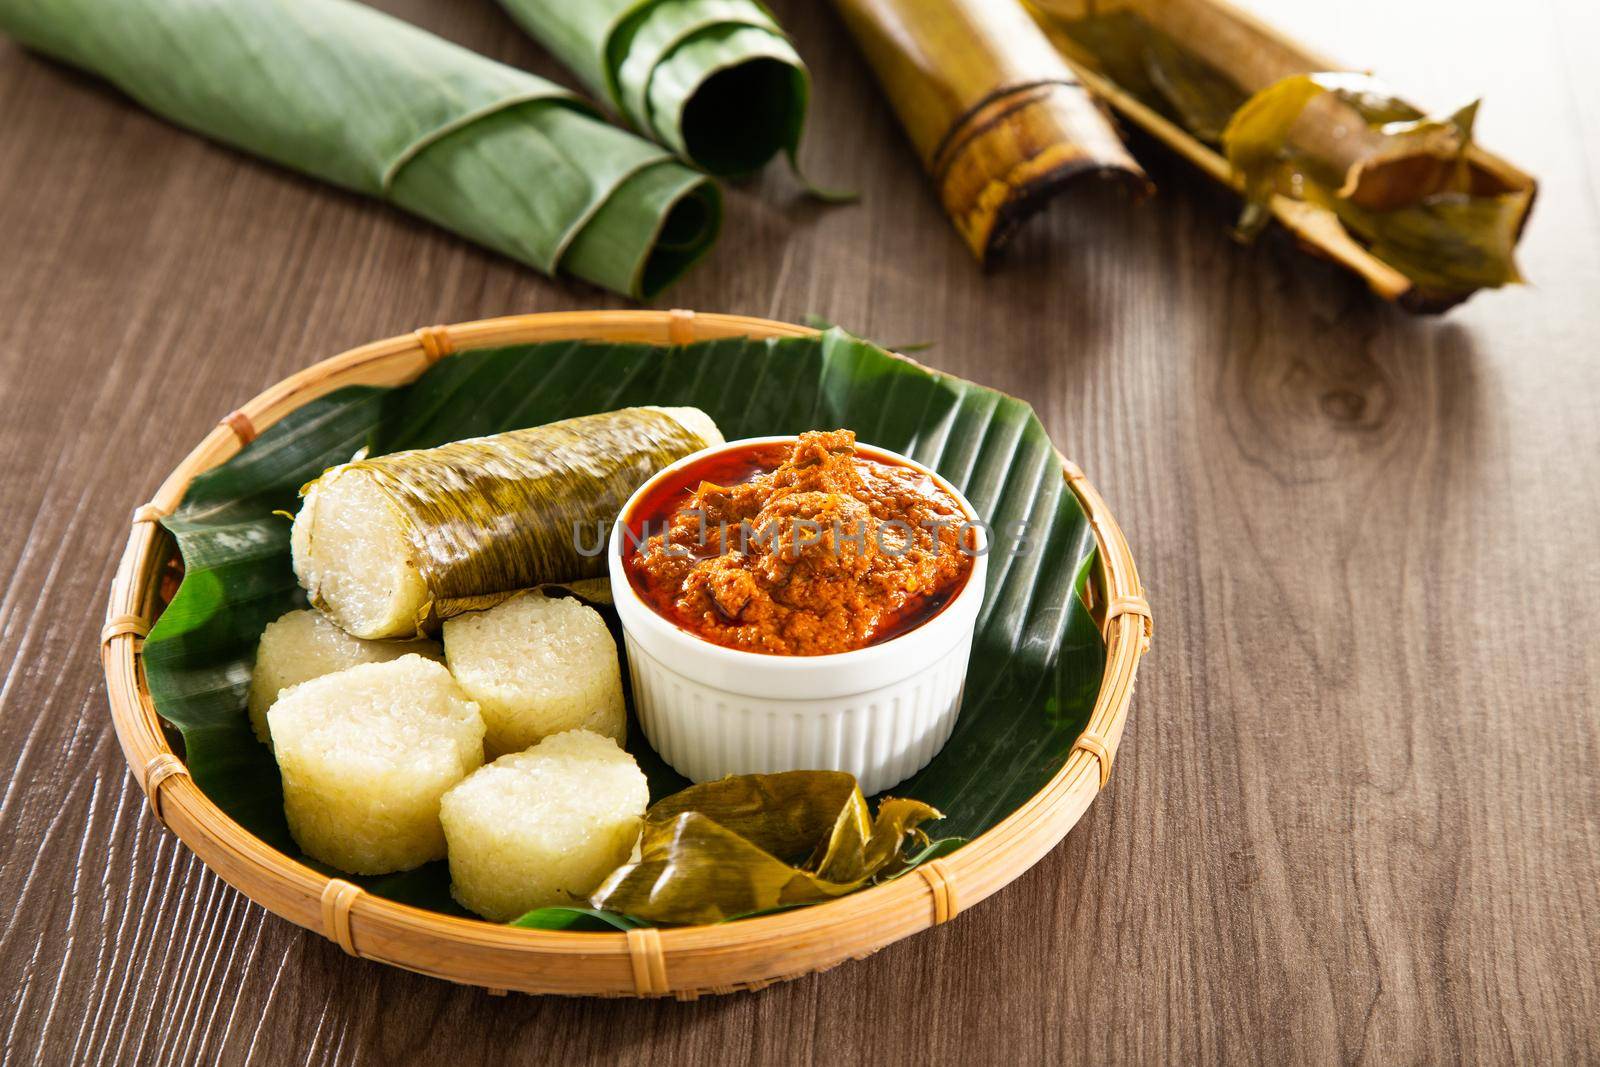 Glutinous rice is wrapped with lerek or banana leaf encased in bamboo culm and cooked in open fire / Lemang / A must have in every traditional Malay household, eaten with beef or chicken rendang by tehcheesiong